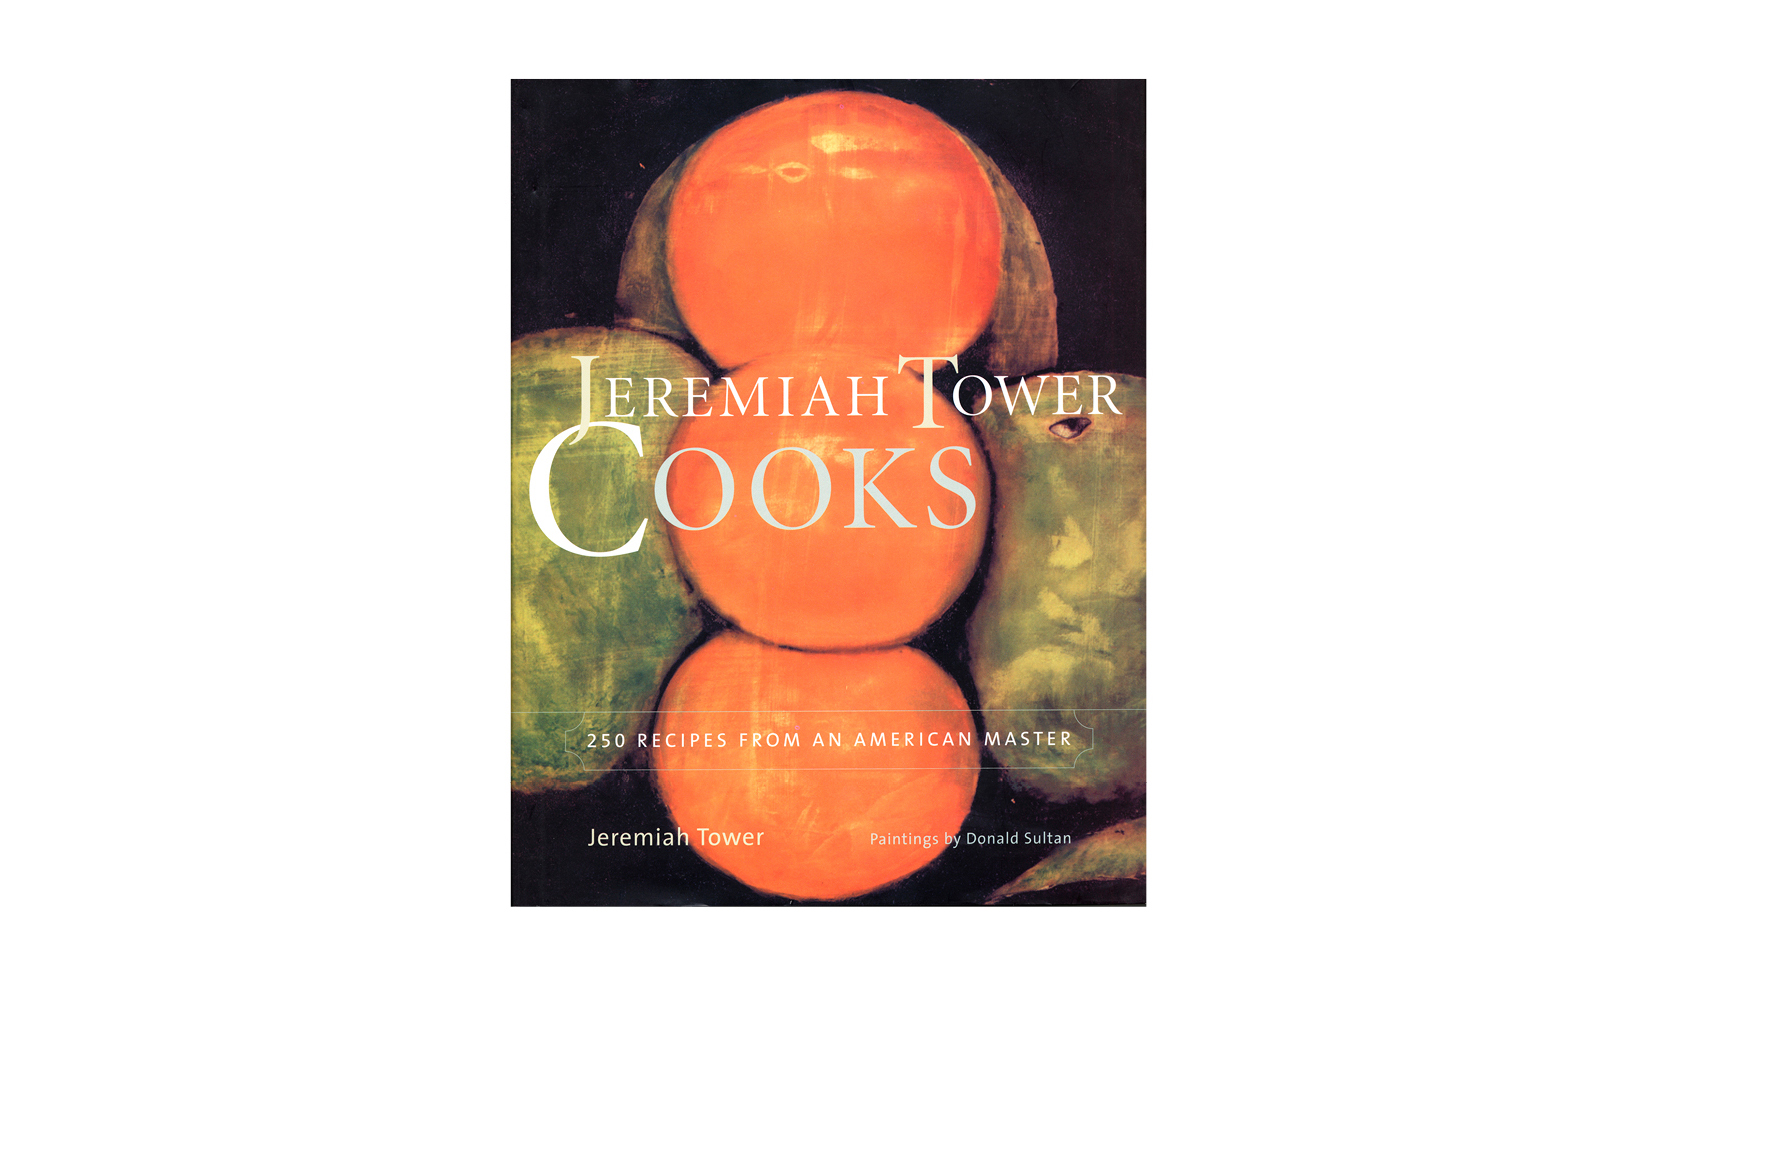   Jerimiah Tower Cooks -  8 X 10.5 in., 288 pg., hardcover with jacket. Design; Galen Smith // Publisher; Stewart, Tabori &amp; Chang     